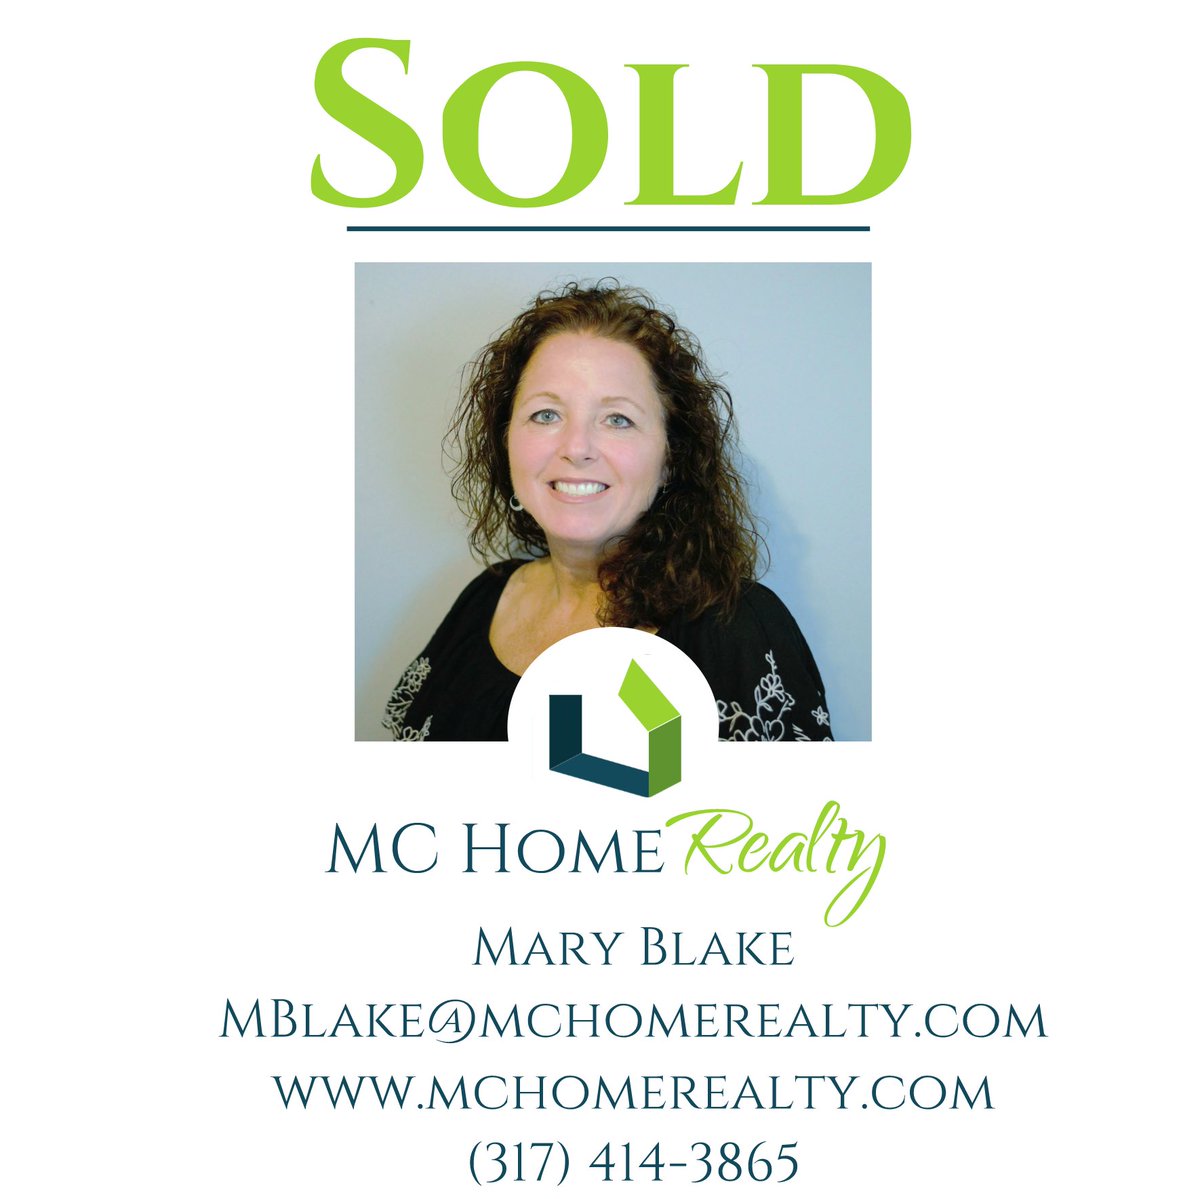 #MCHomeRealty would like to introduce - Mary Blake!
As a veteran herself Mary is a seasoned Realtor that specializes in serving her fellow veterans!
Read More...
mchomerealty.com/mary-blake/

#veteran #veteranservingveterans #VA #sellyourhome #buyahome